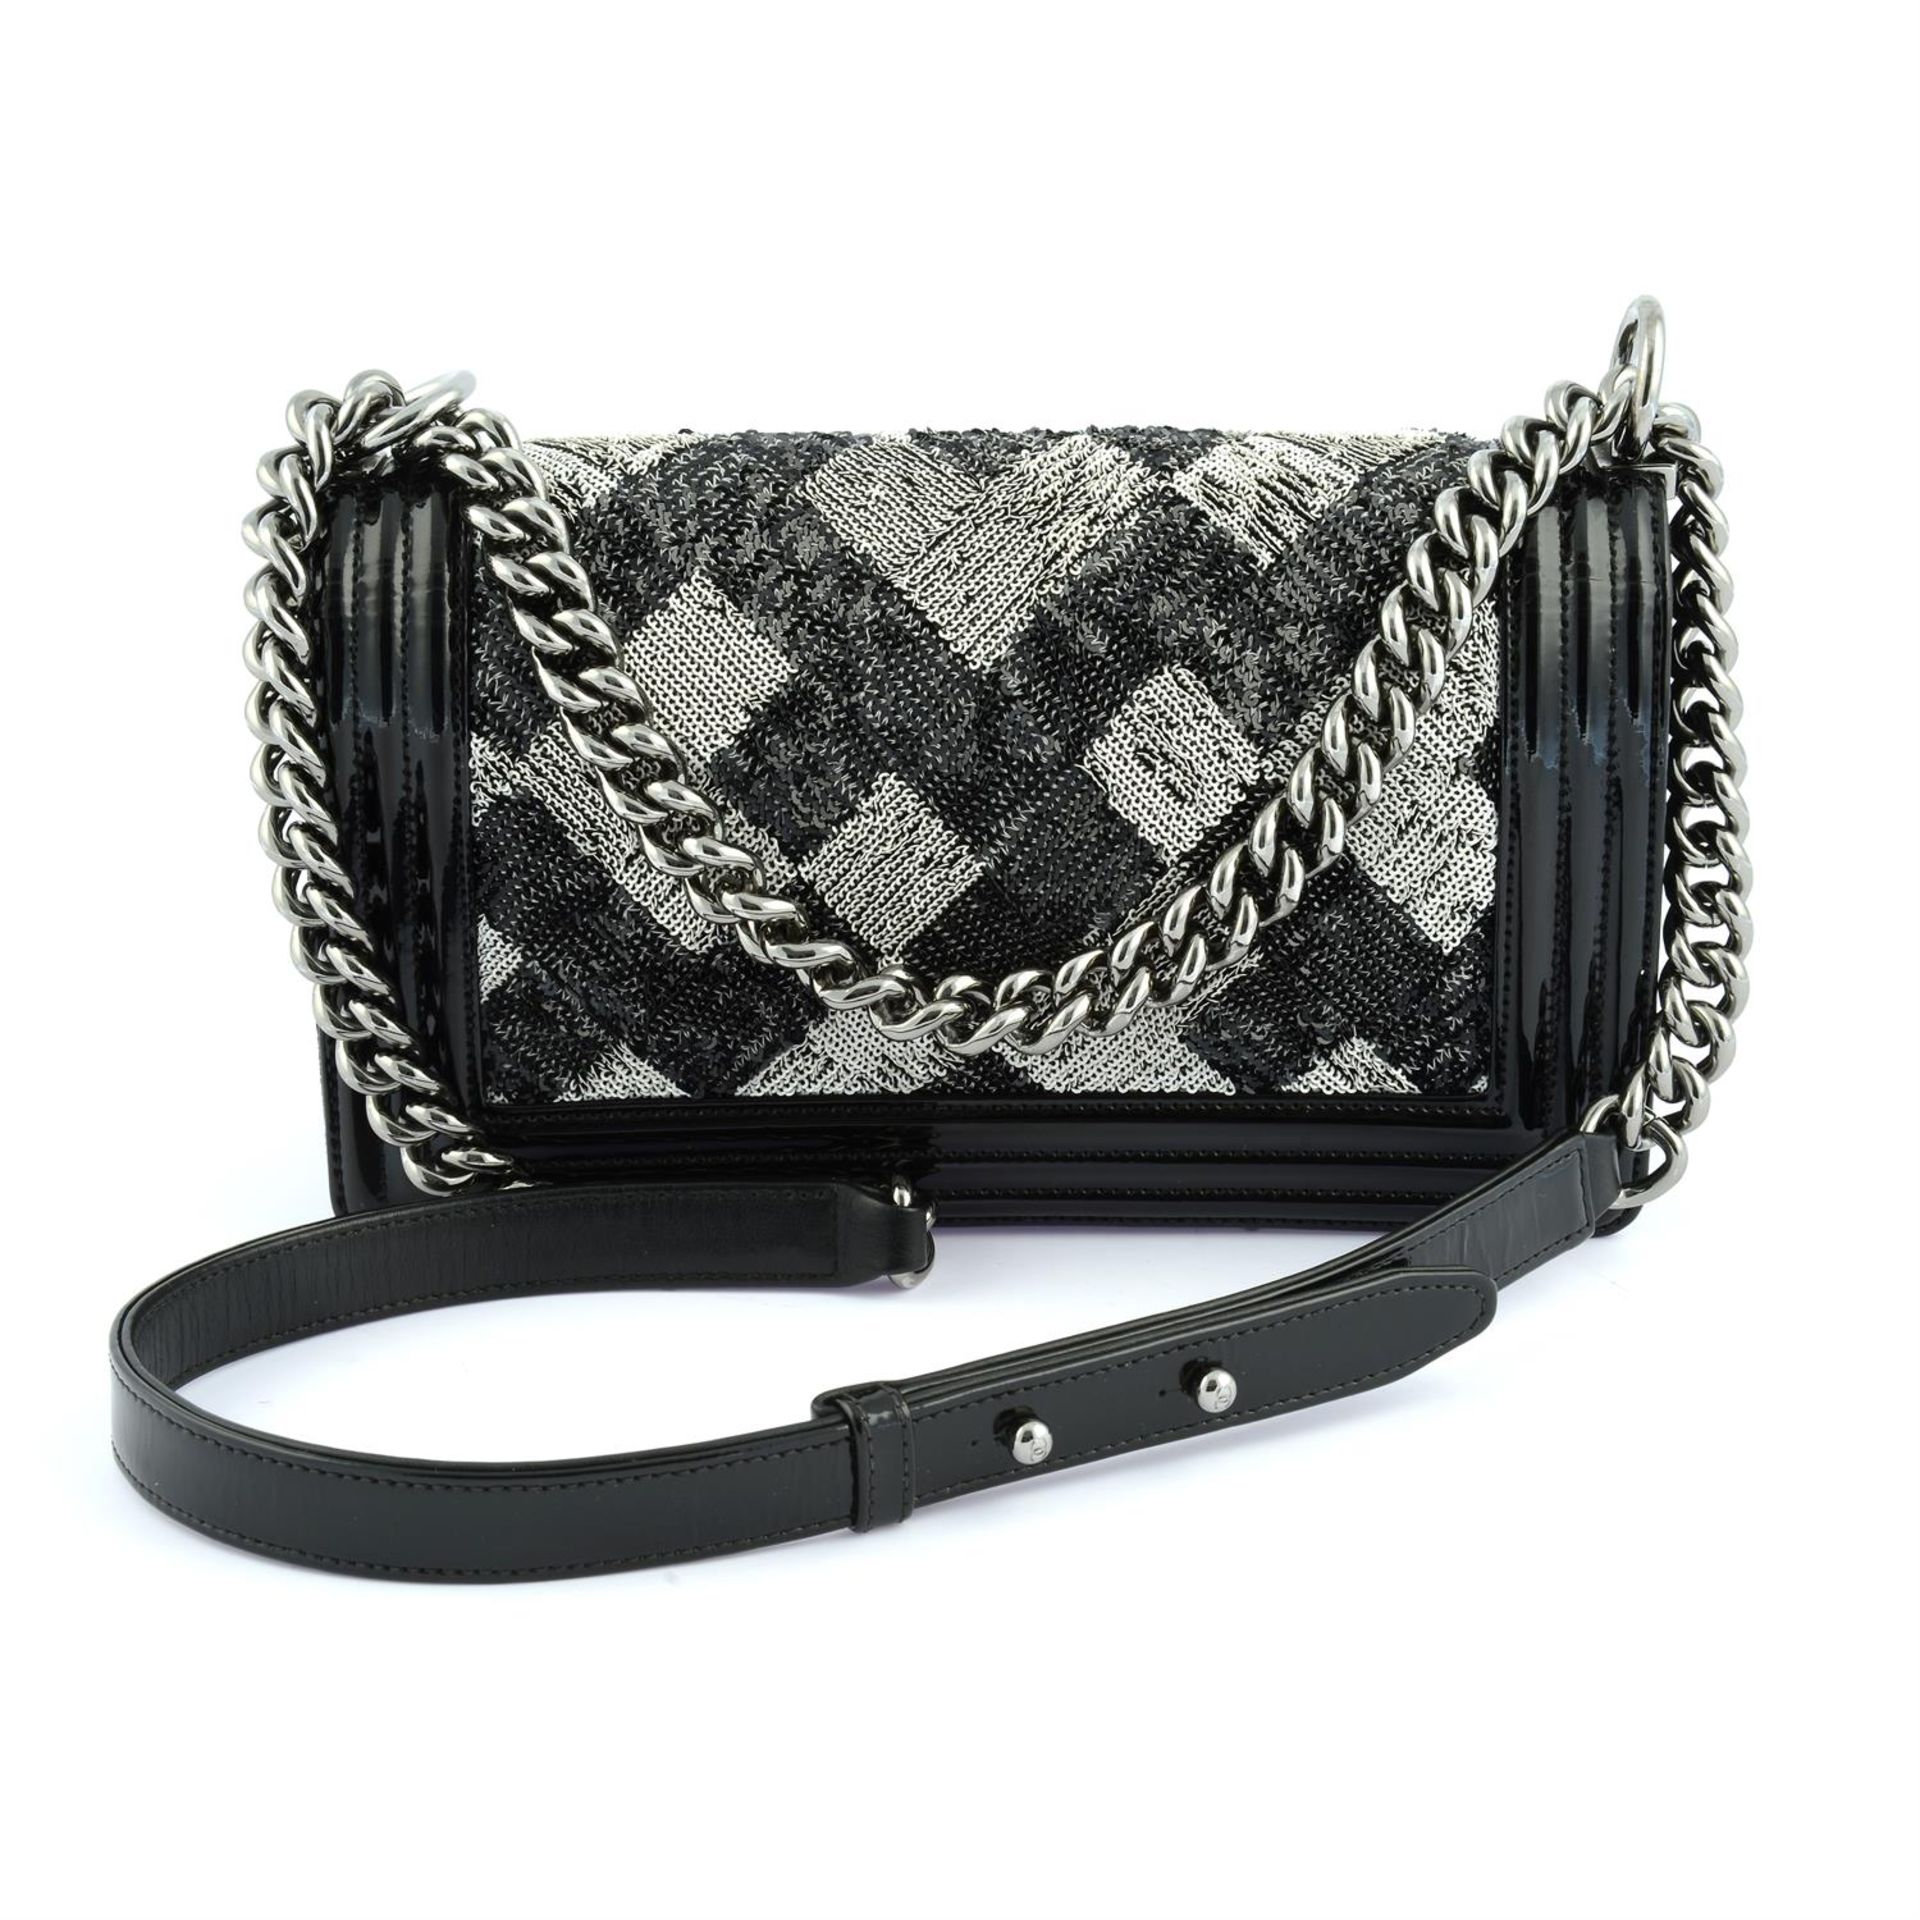 CHANEL- a patent leather sequin boy bag. - Image 2 of 5